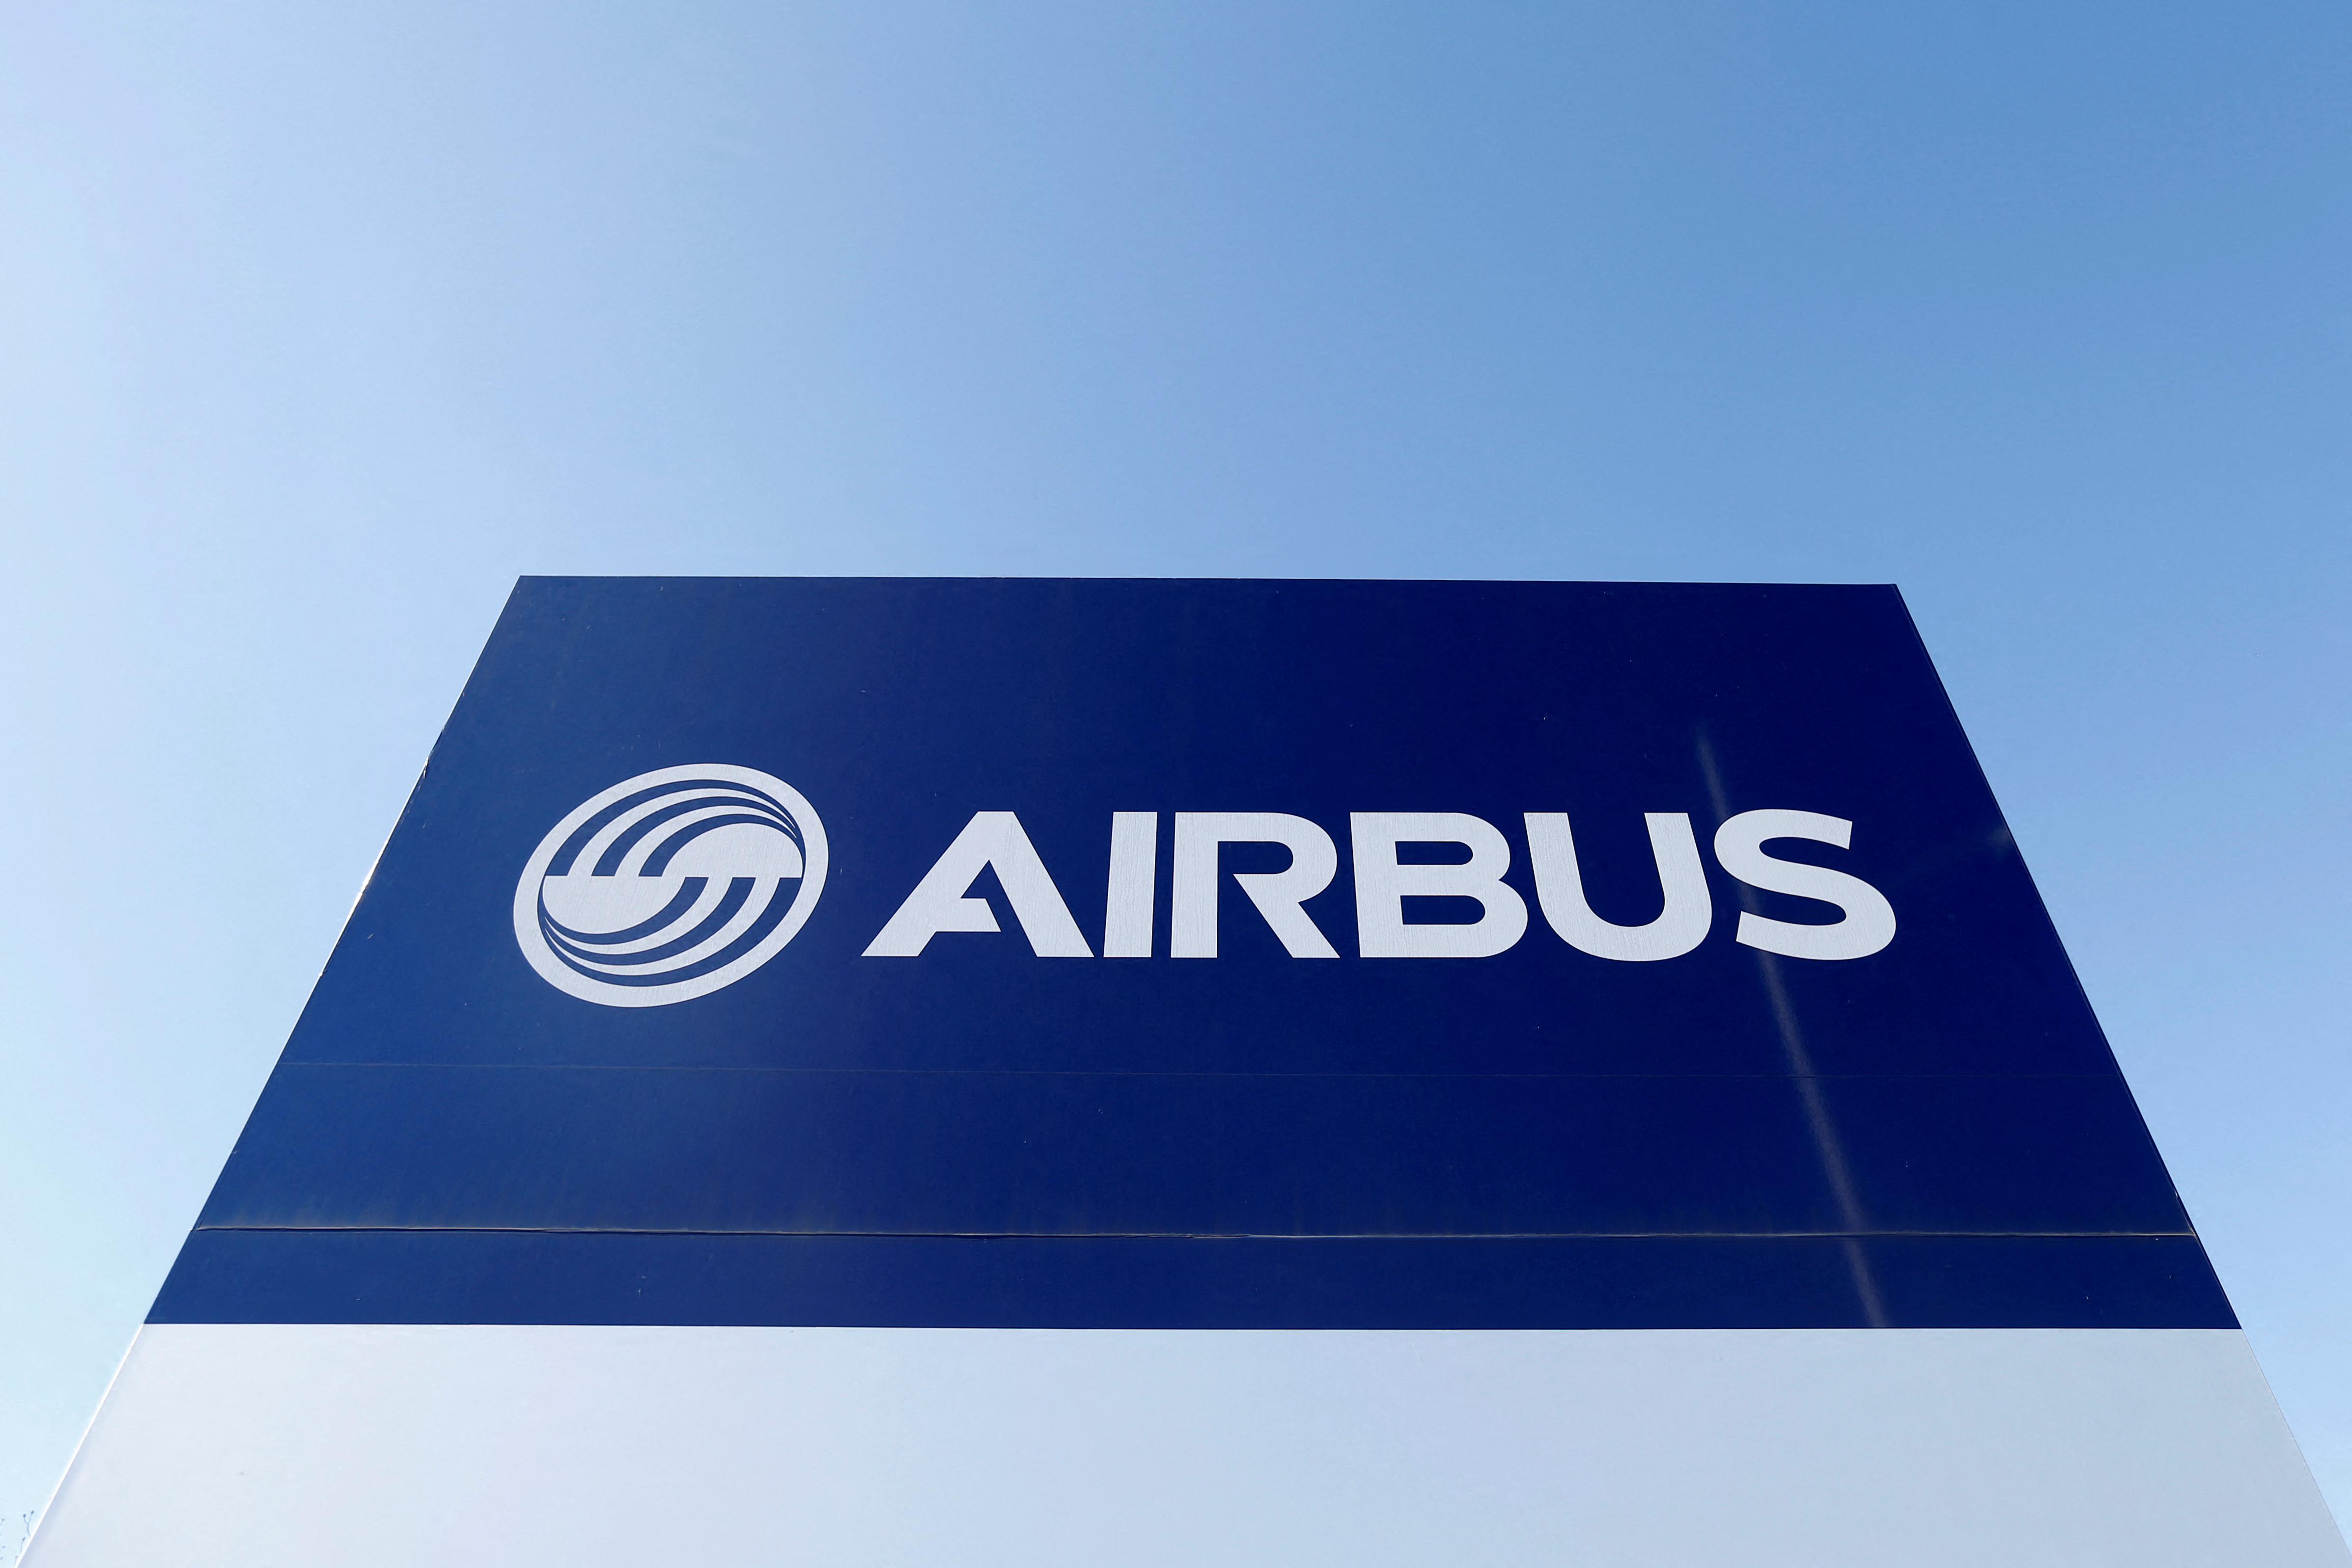 A logo of Airbus is seen at Airbus headquarters in Blagnac